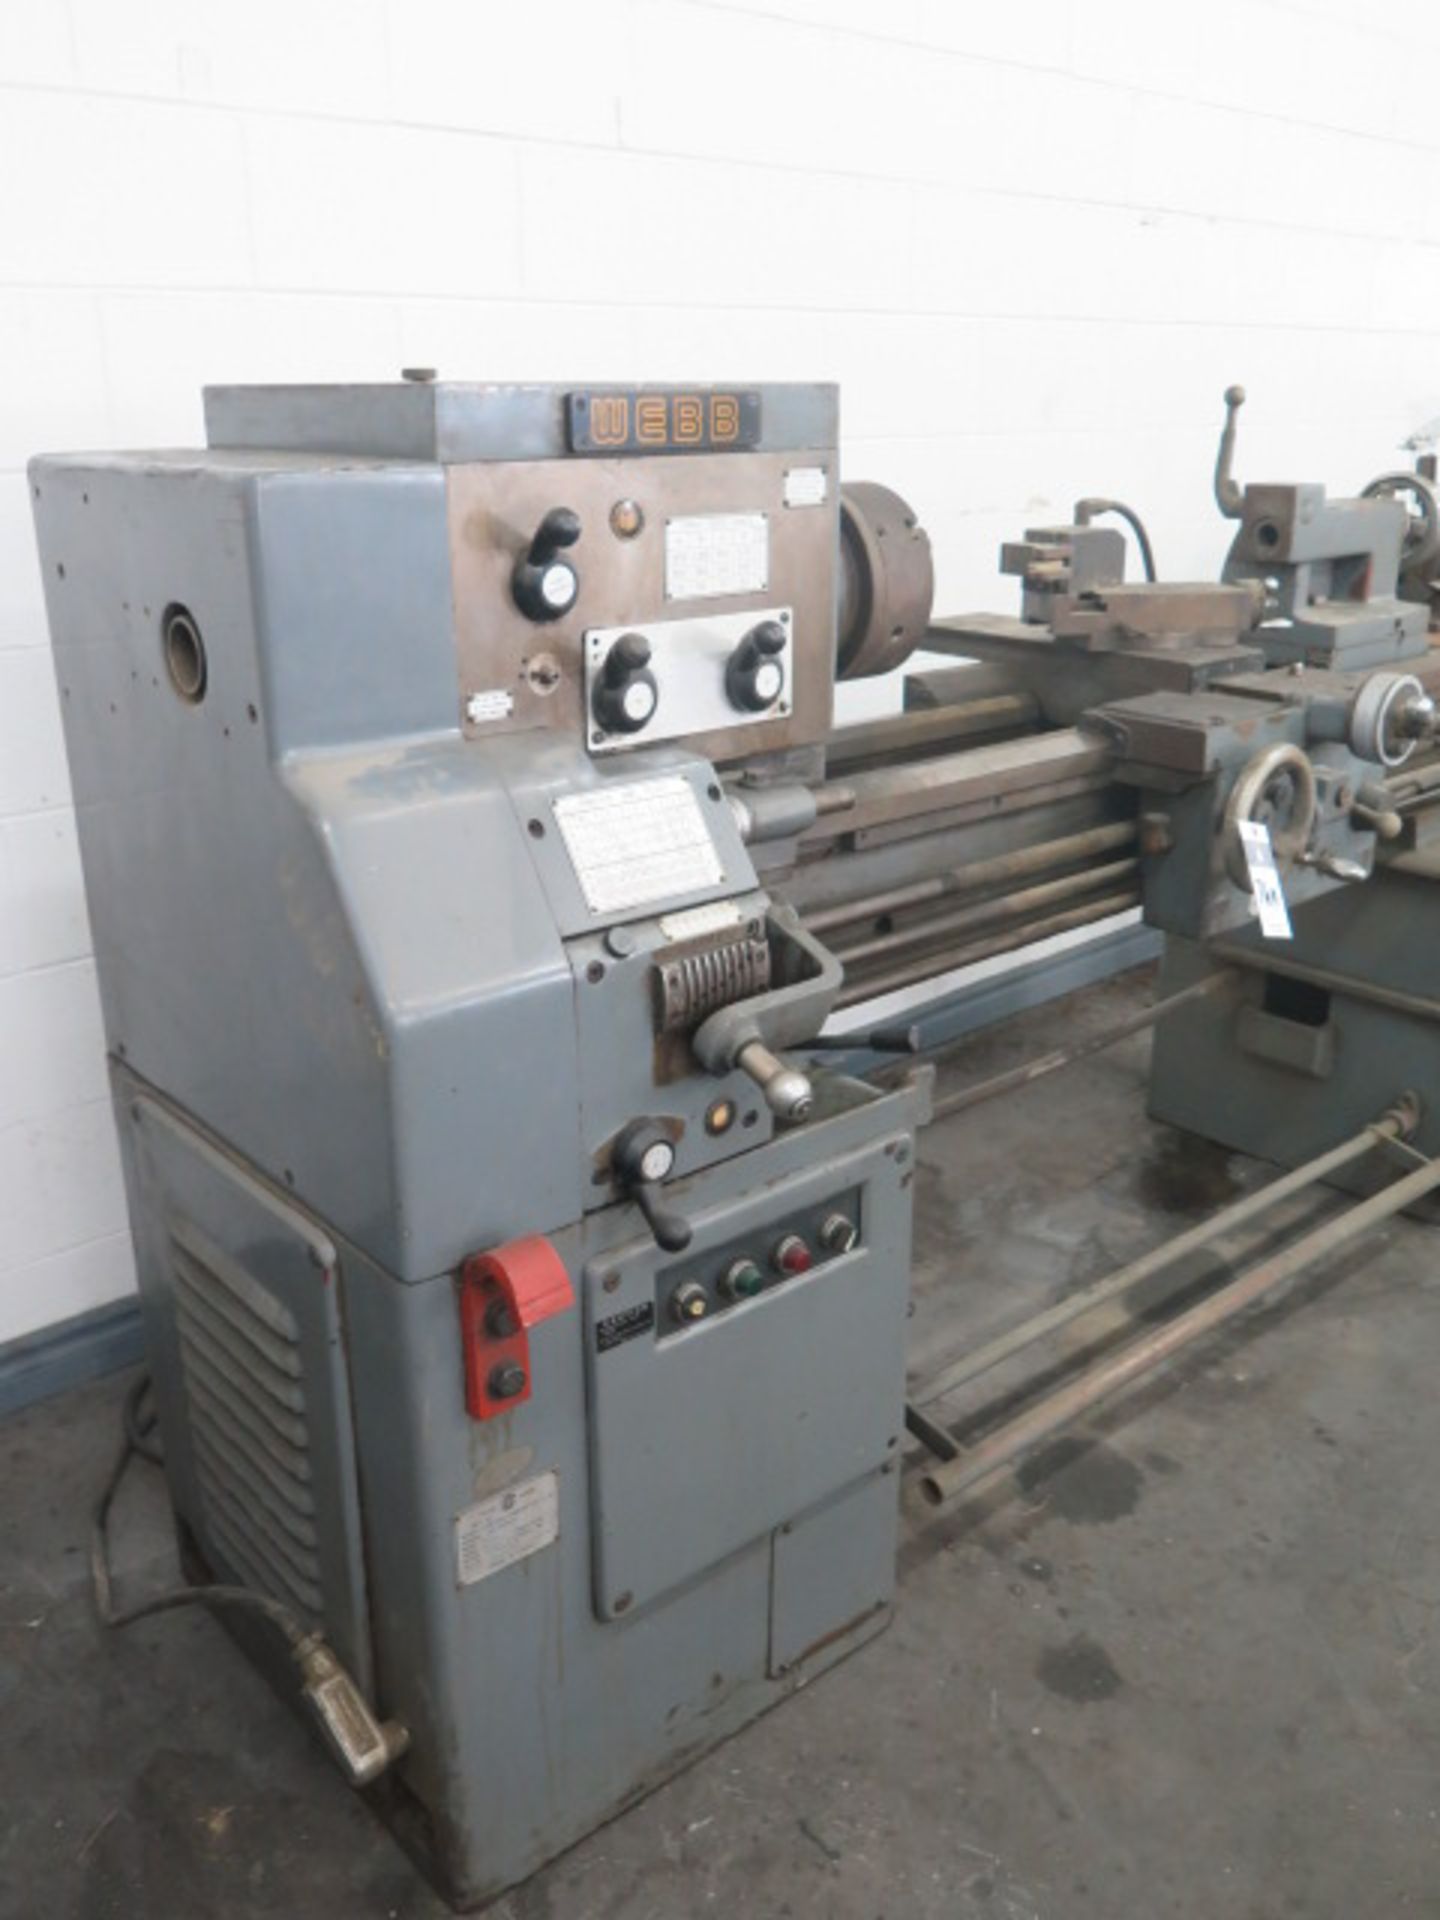 Webb 16" x 42" Geared Head Lathe w/ 50-1850 RPM, Inch Threading, Tailstock, KDK Tool (NO CHIP TRAY) - Image 2 of 11